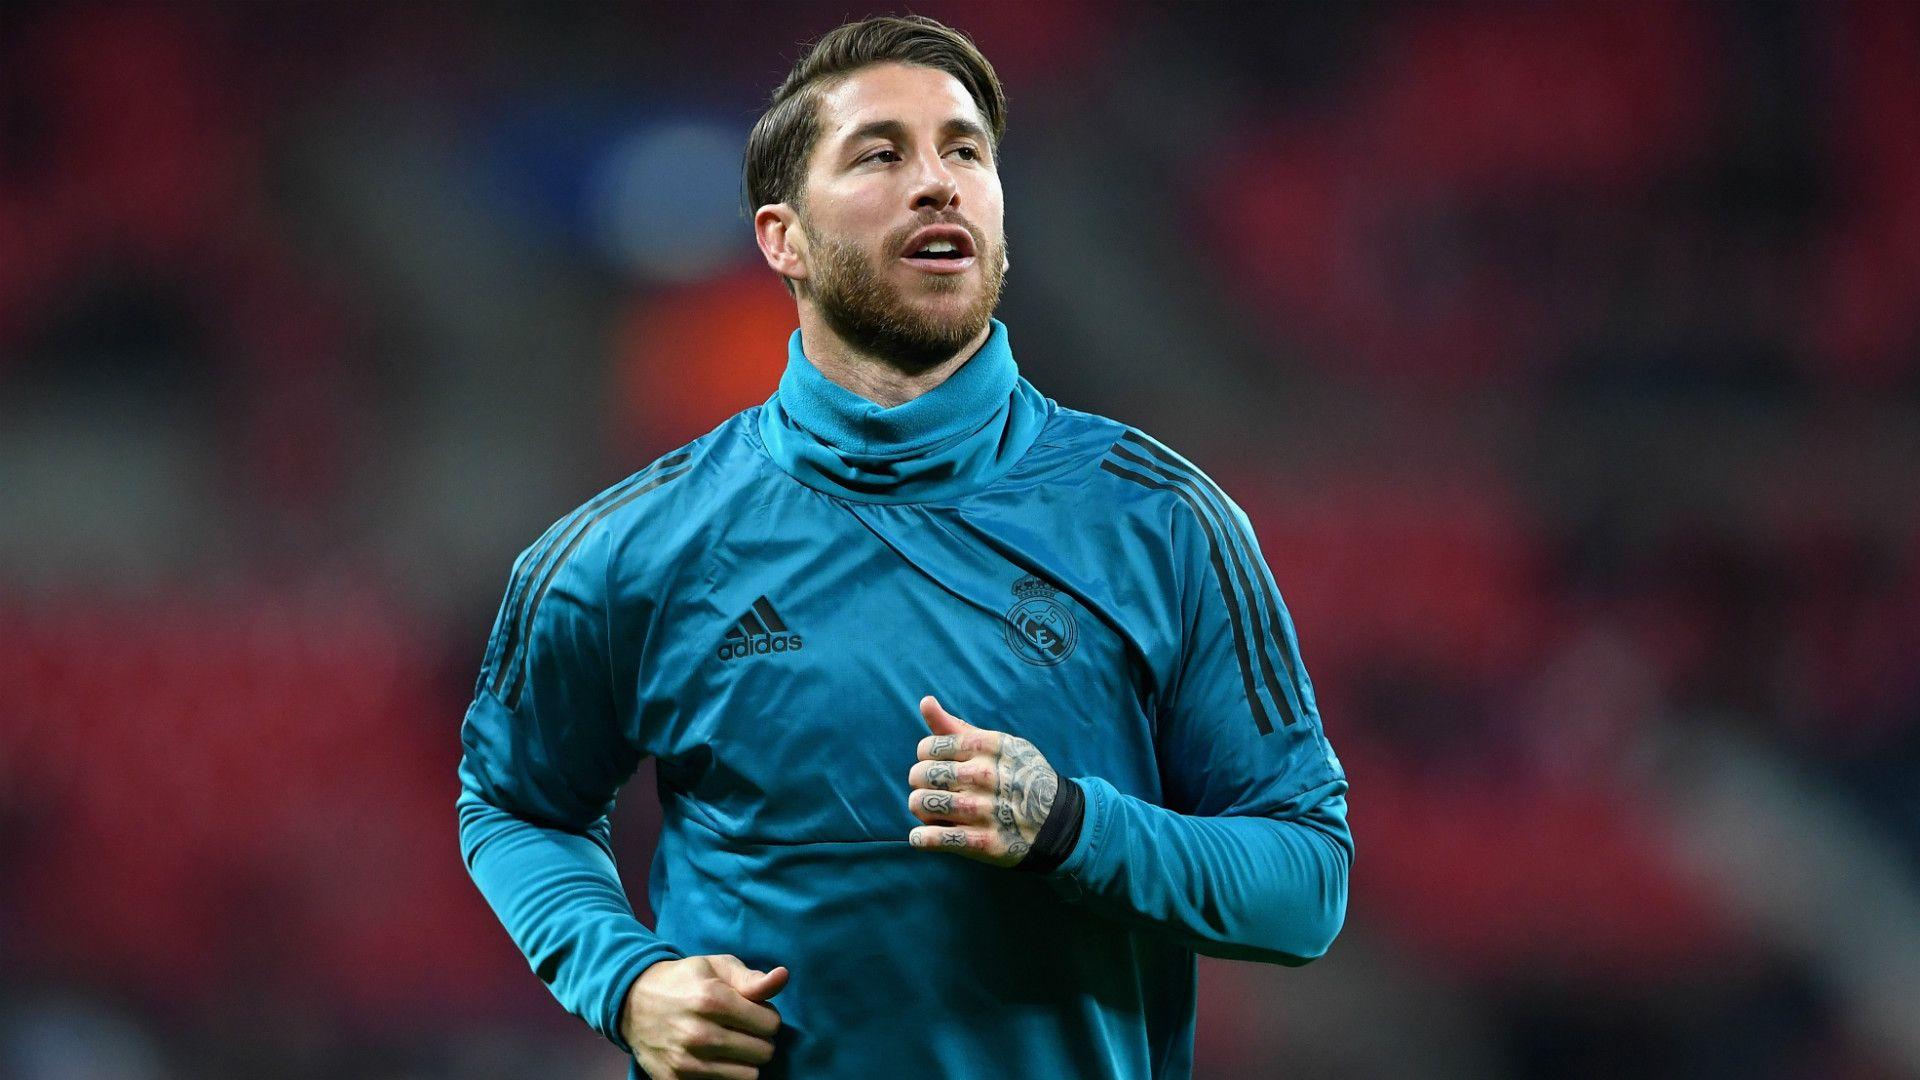 Ramos trains for Real Madrid as wounded Ronaldo works indoors. LA